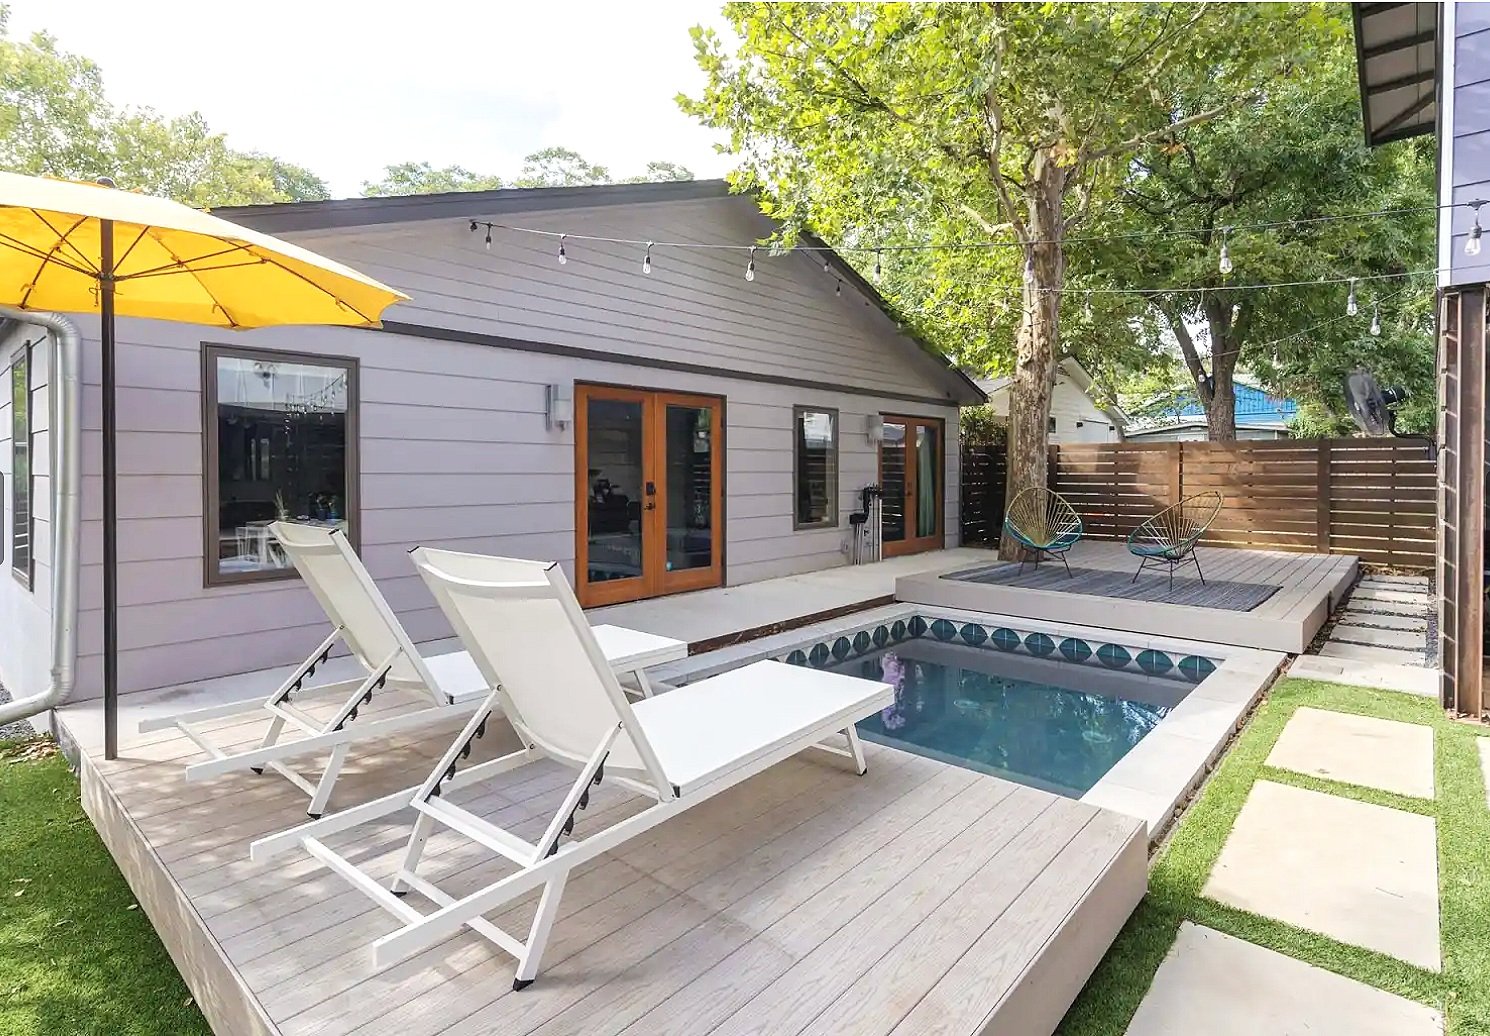 Narrow backyard with tiled plunge pool and decking with seating on either side